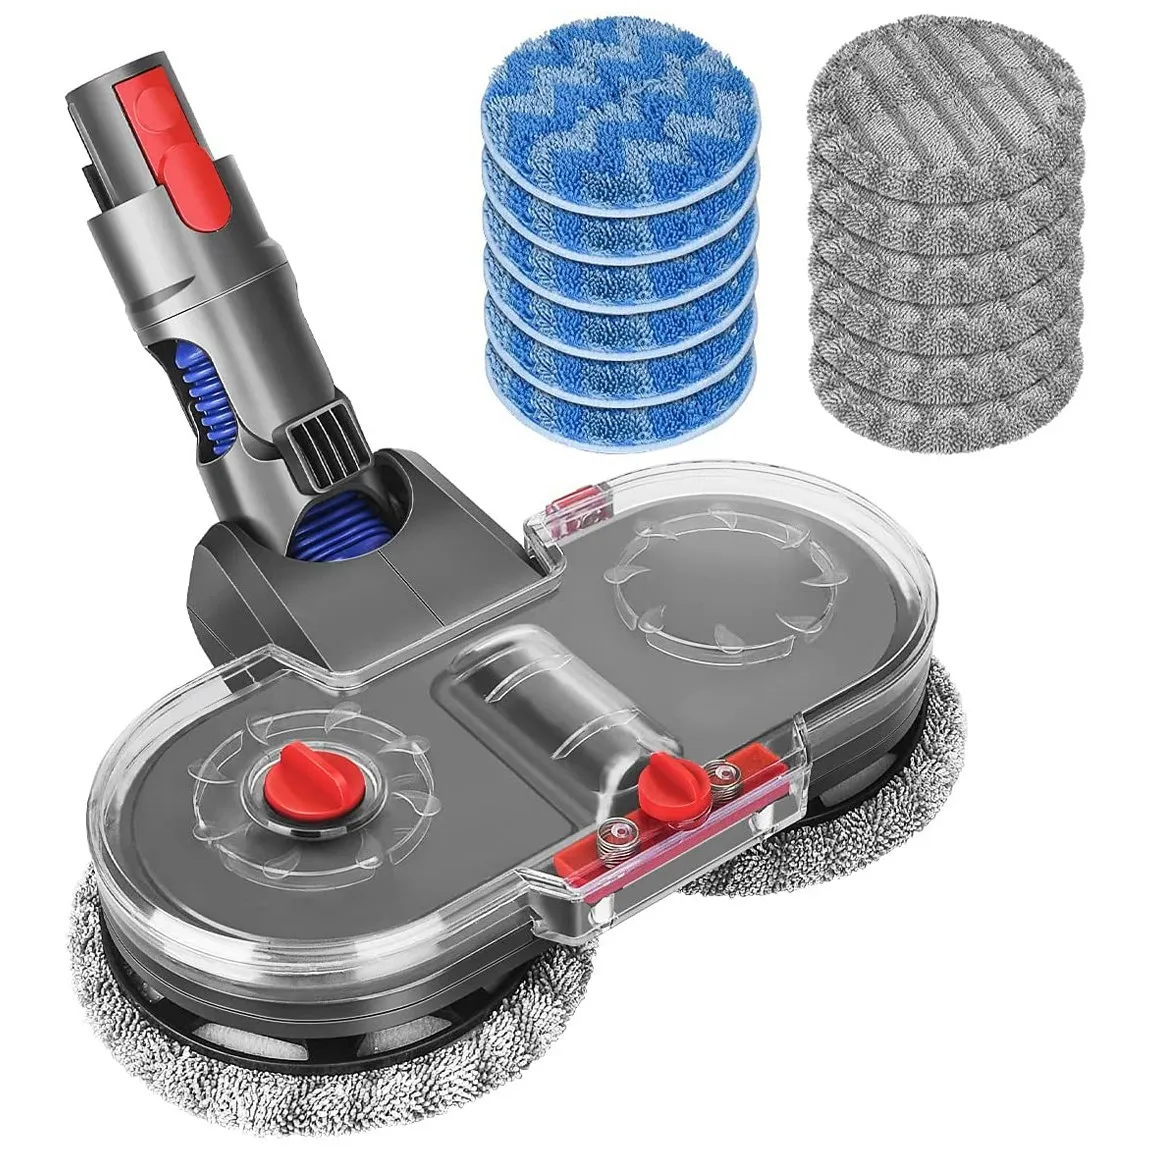 

Mop Attachment for Dyson V15 V11 V10 V8 V7 Vacuum Cleaner, Electric Mop Attachment with Water Tank and 12 Washable Mops